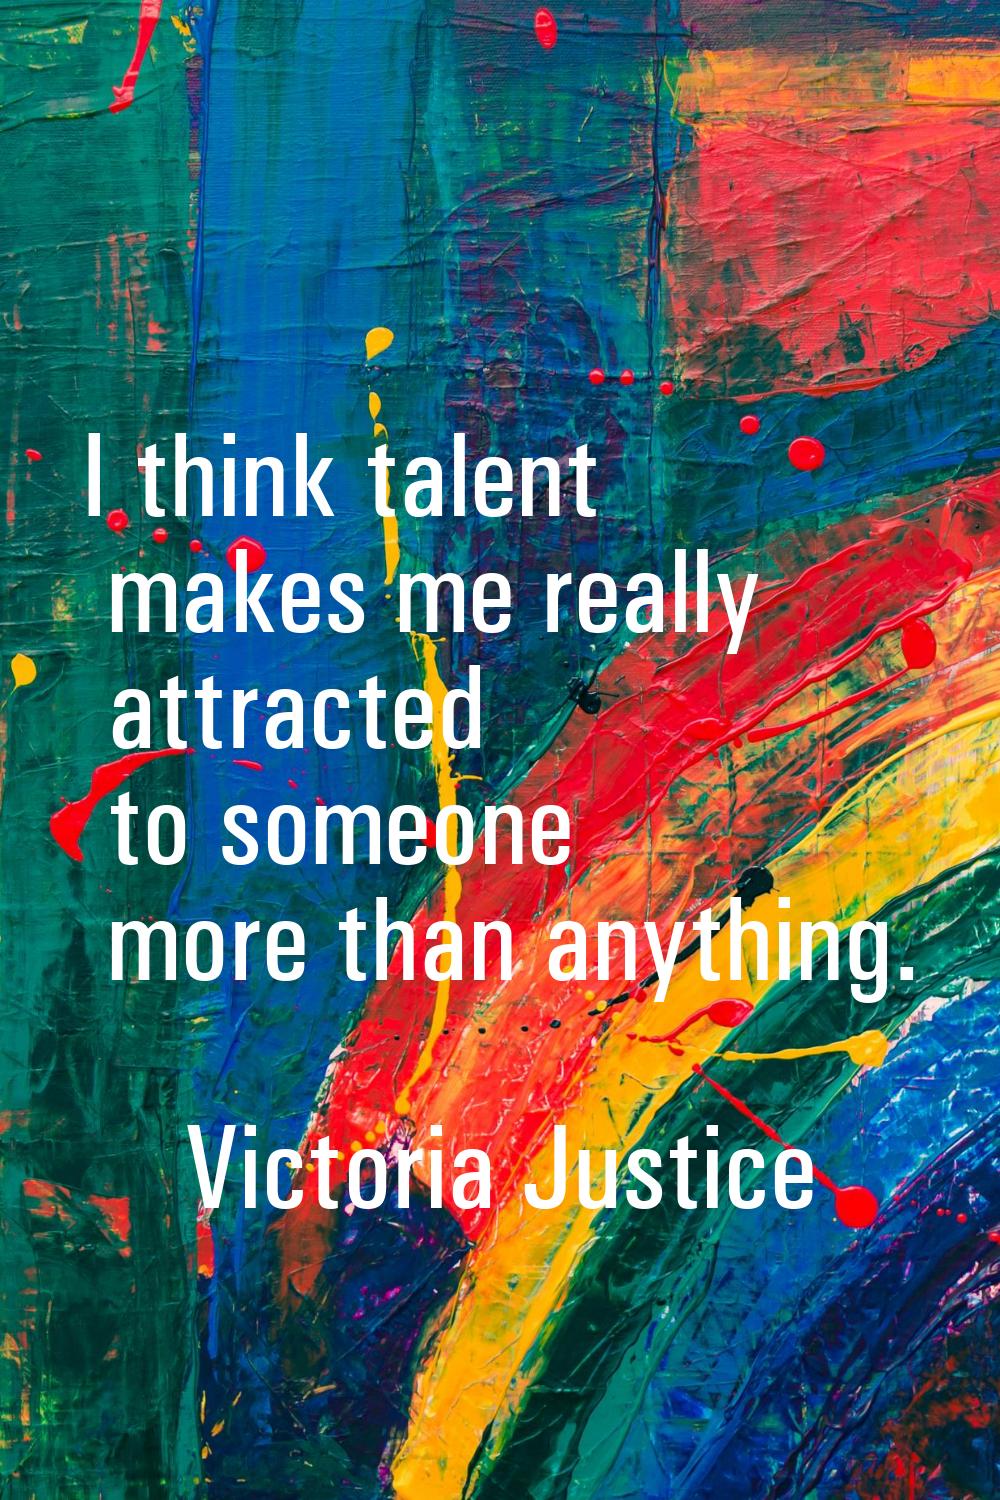 I think talent makes me really attracted to someone more than anything.